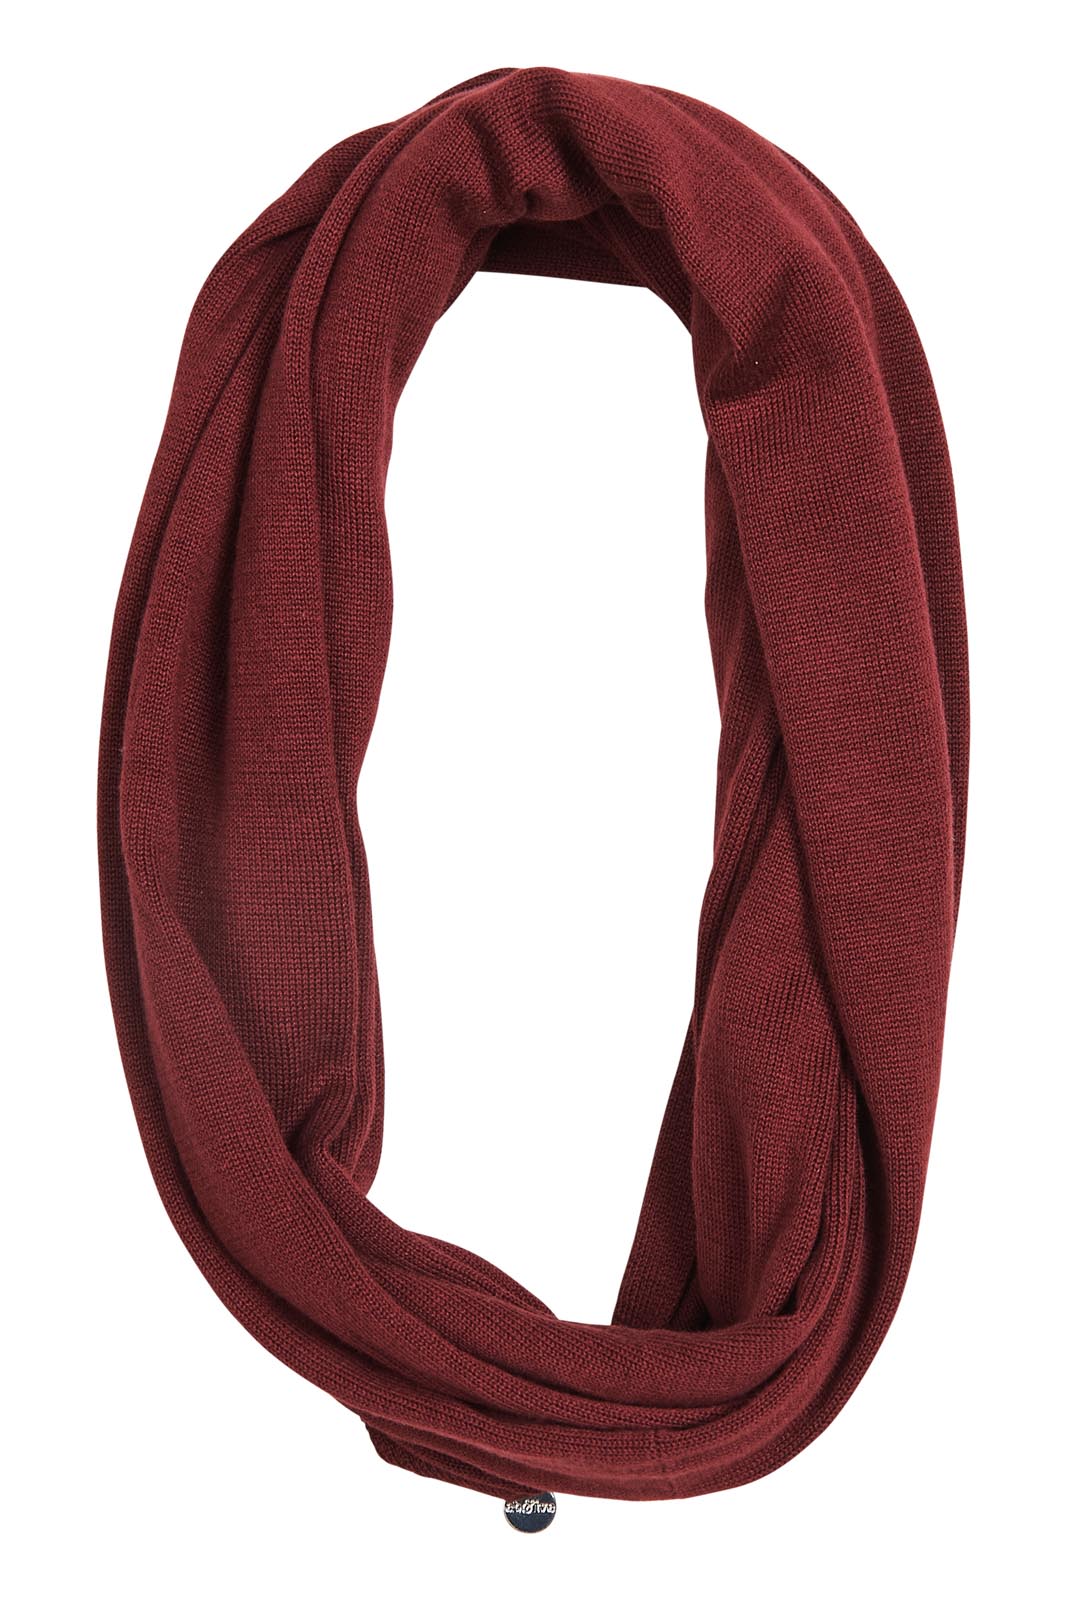 Astor Snood - Mulberry - eb&ive Scarves